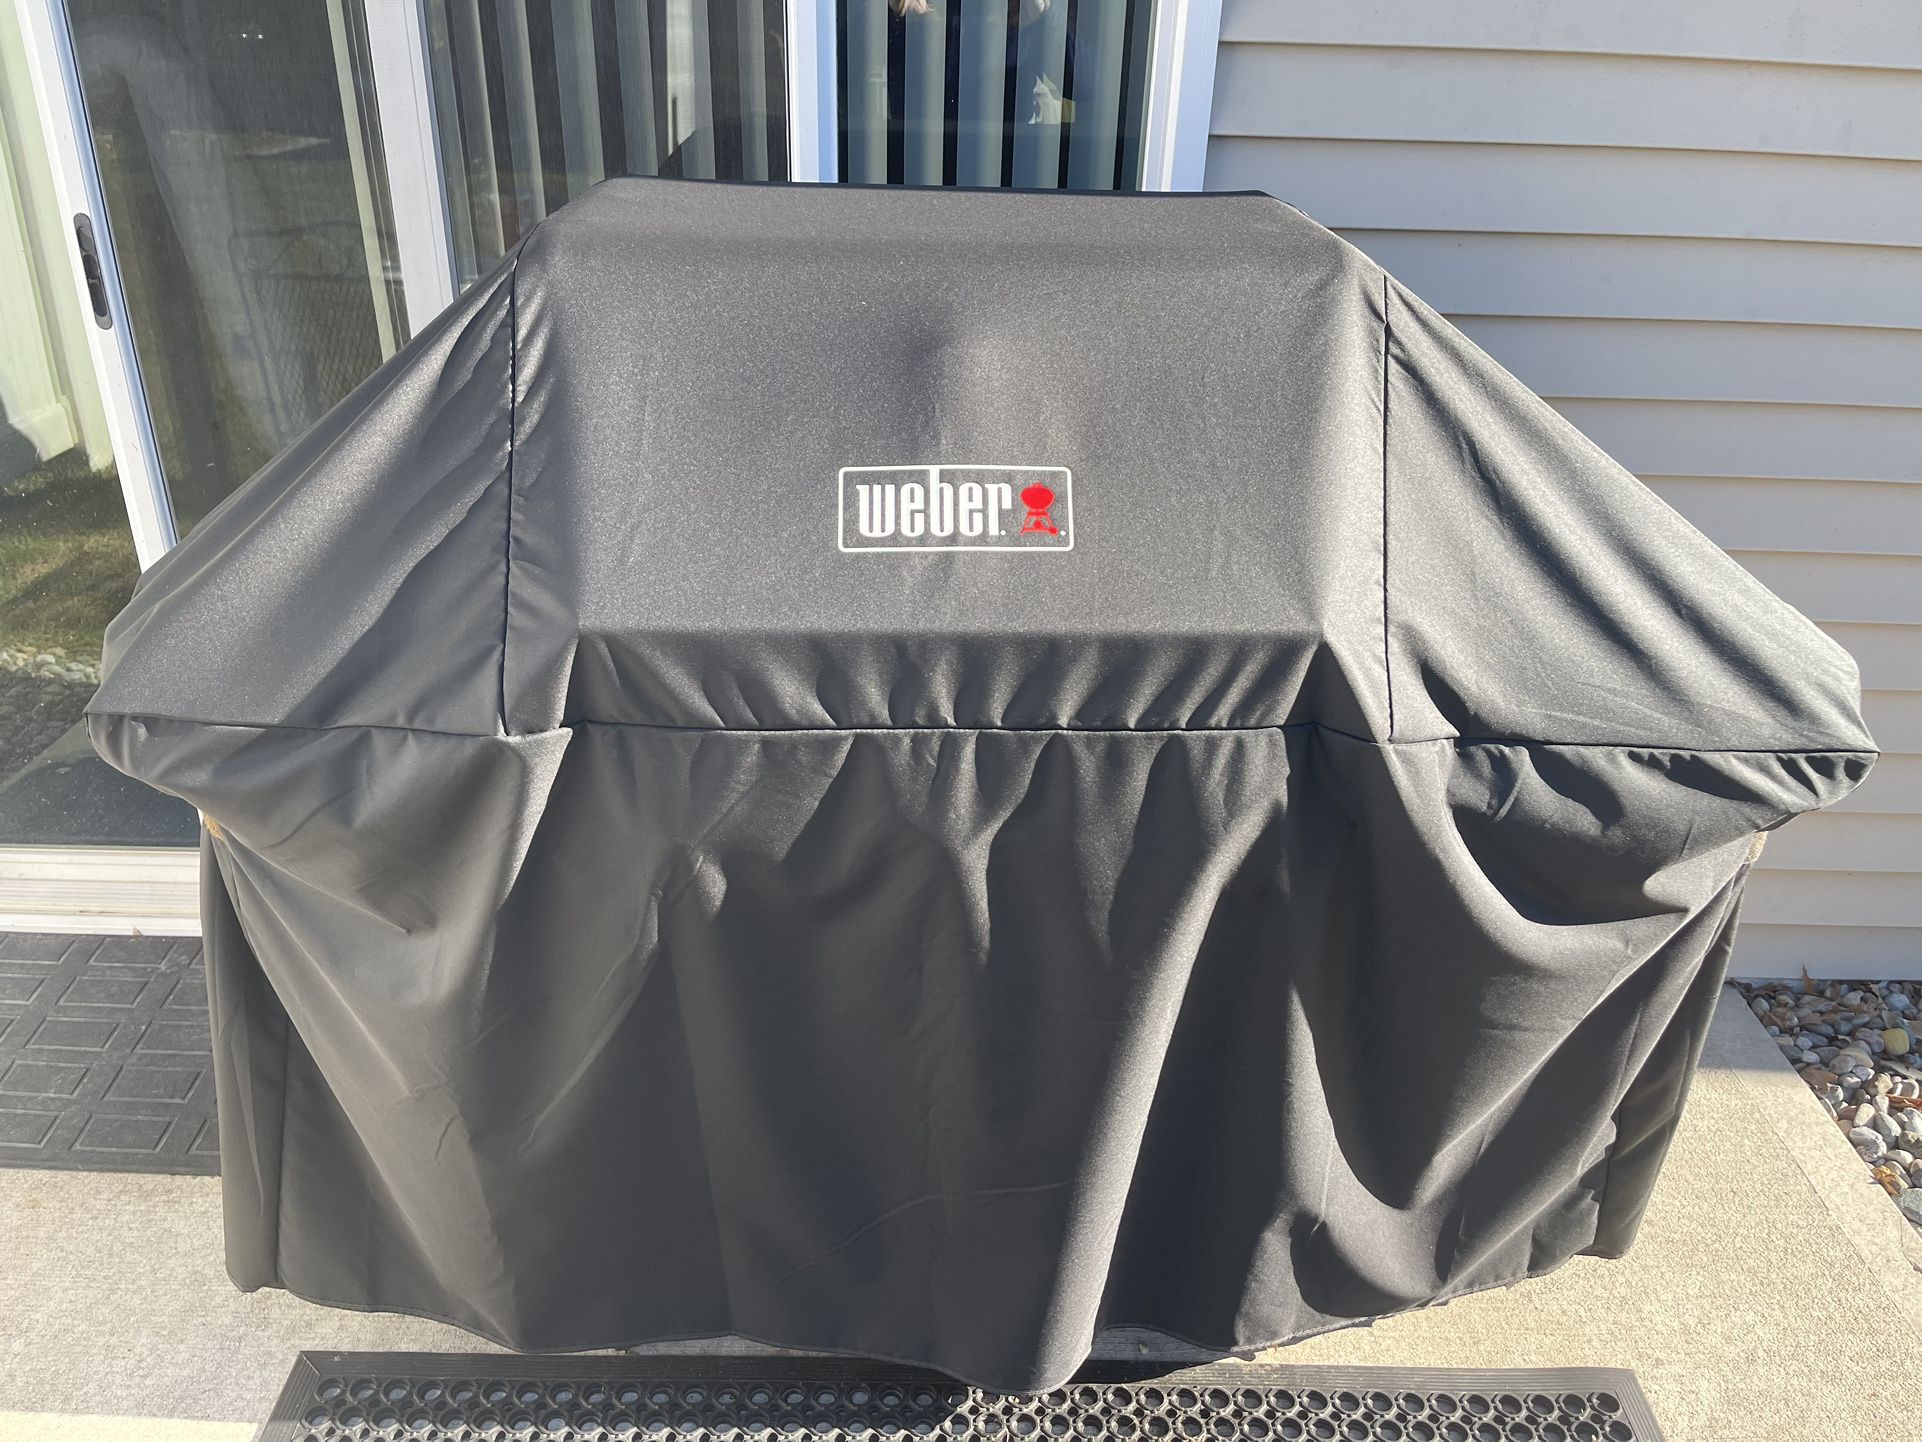 Weber Genesis Grill With Cover/Mat